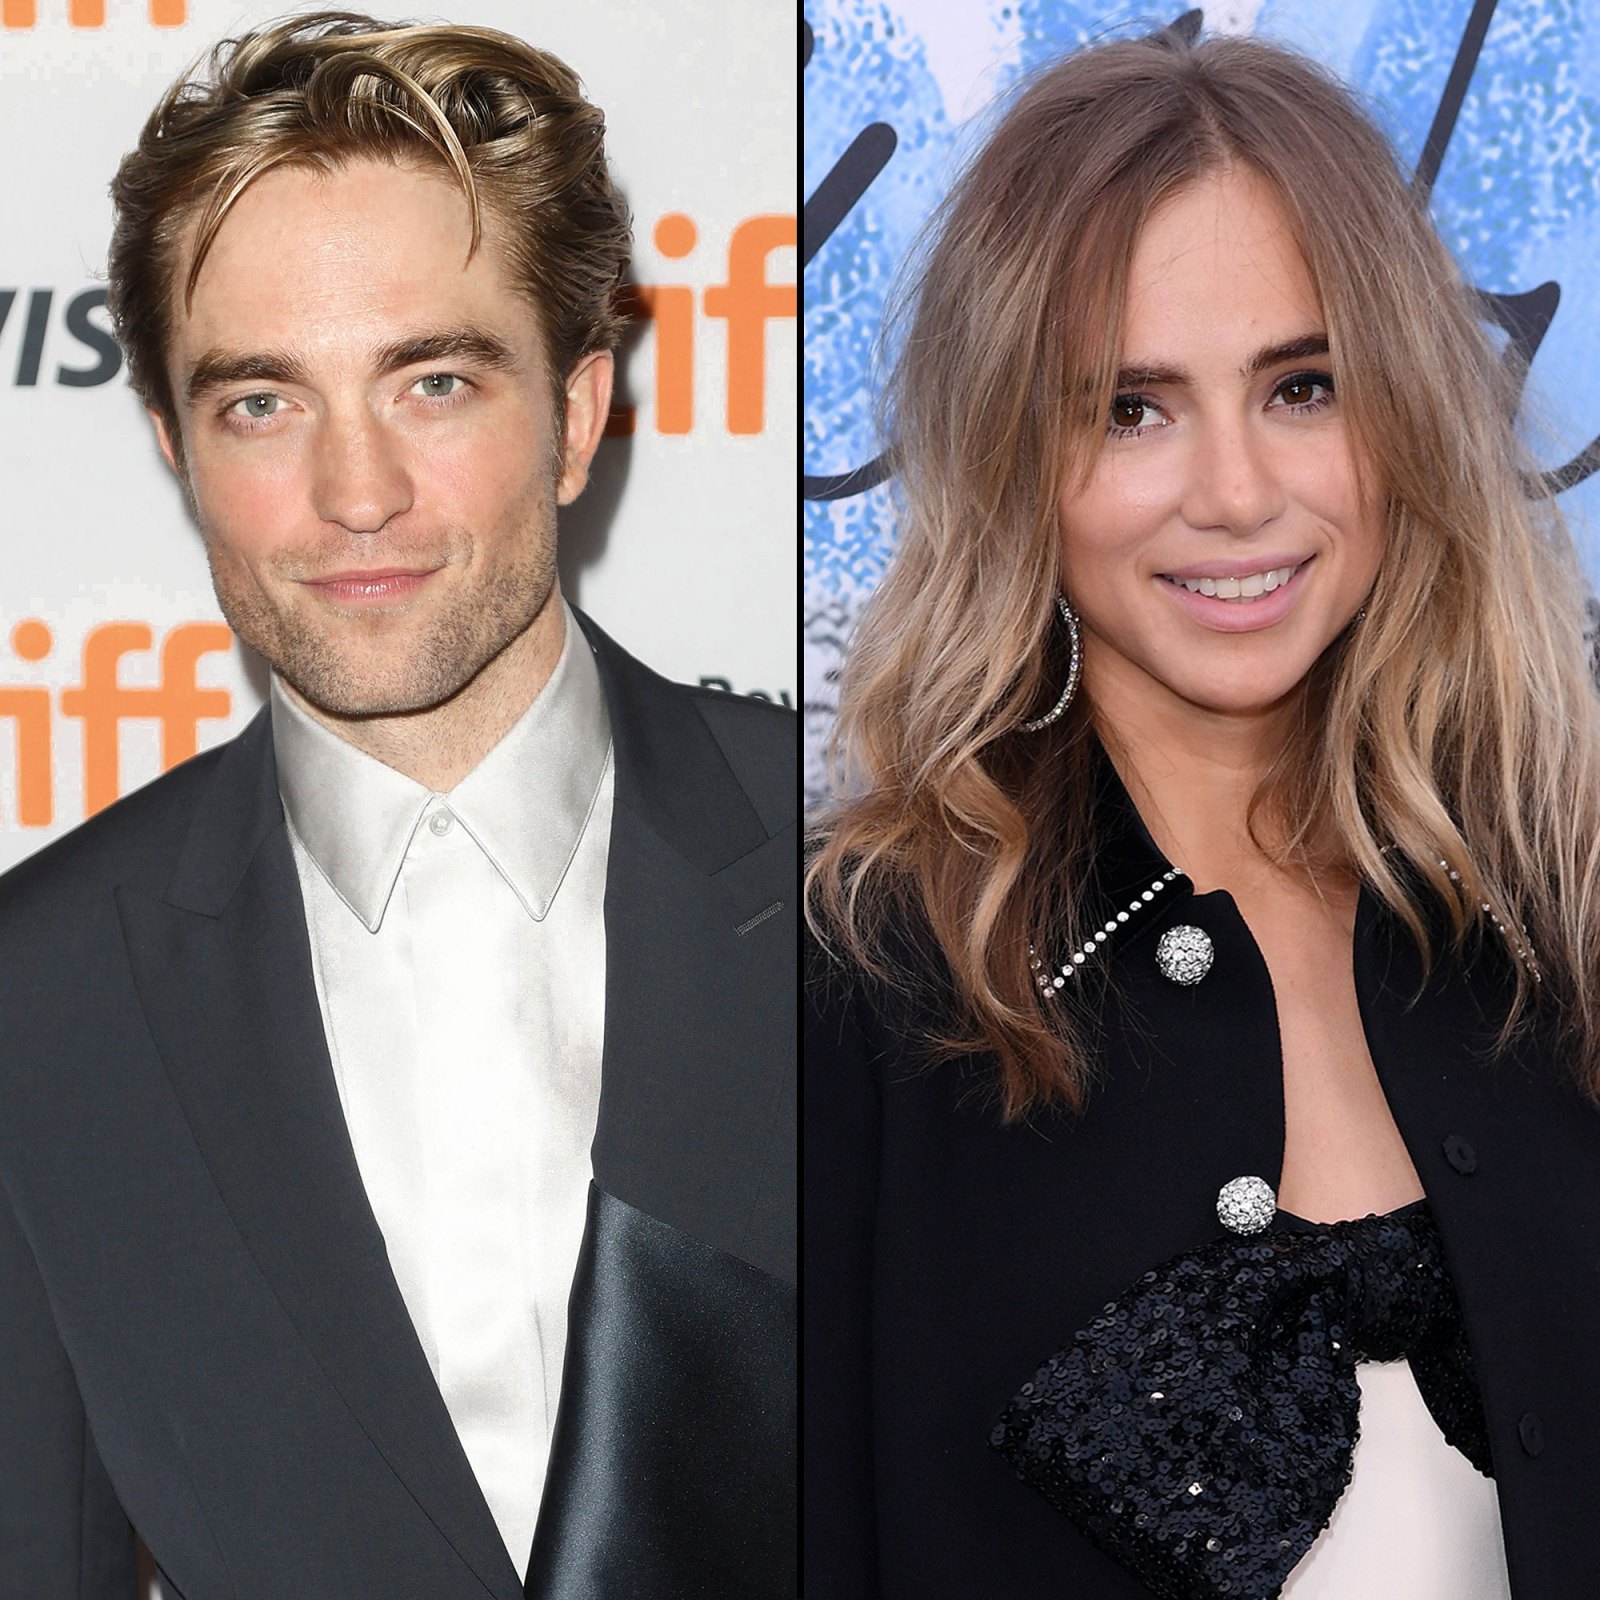 Robert Pattinson and Suki Waterhouse: A Timeline of Their On-Again, Off-Again Relationship